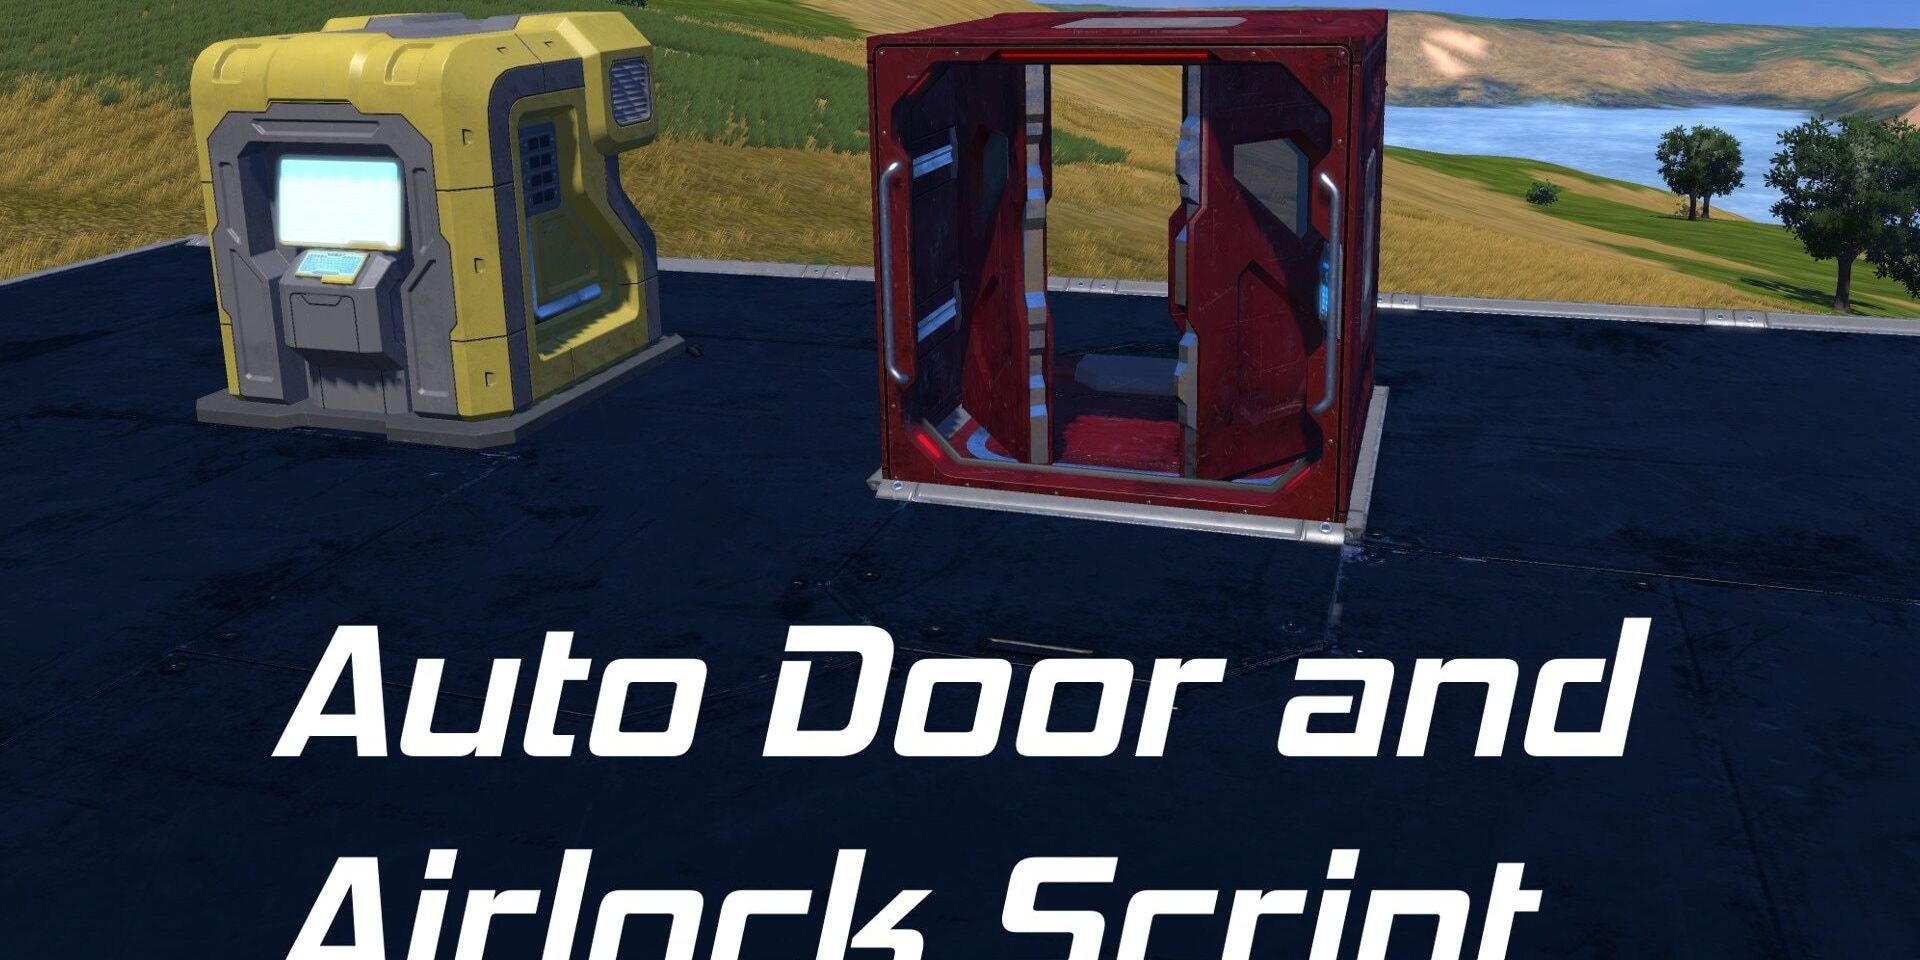 automatic door and airlock 